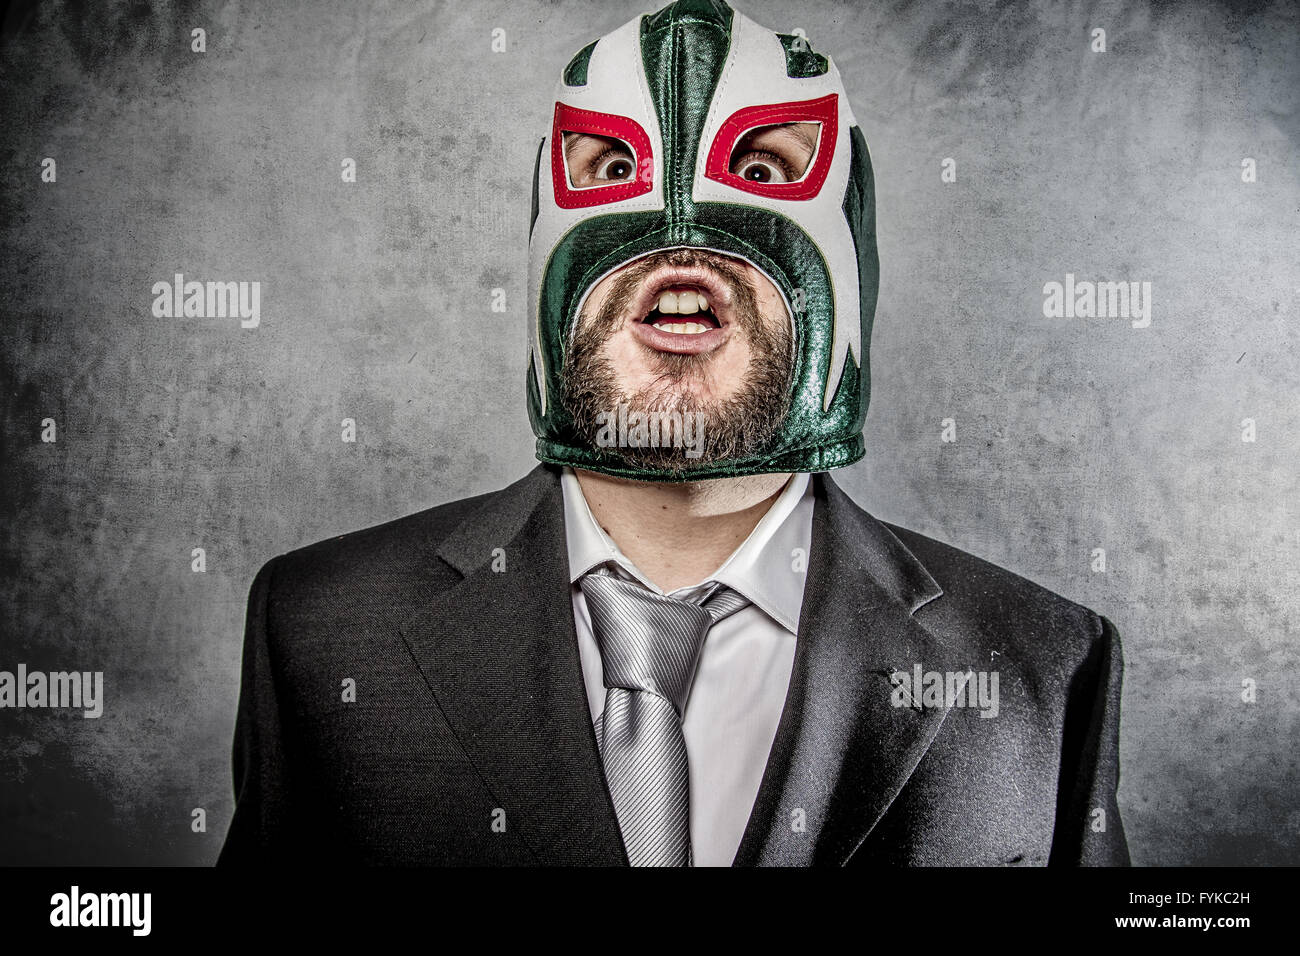 Trouble, businessman angry with Mexican wrestler mask Stock Photo